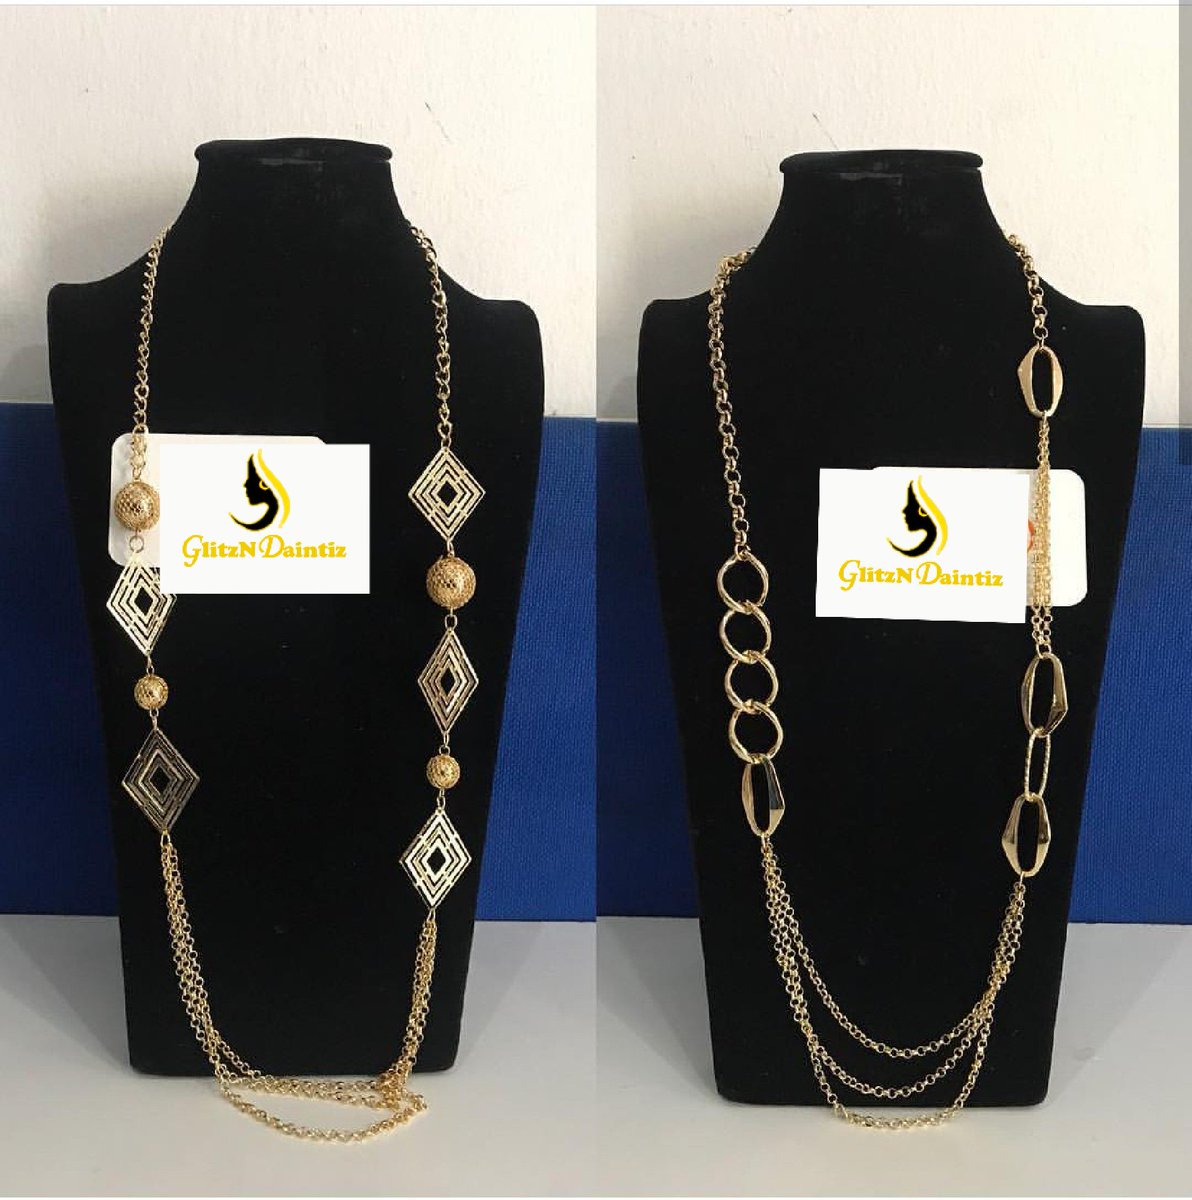 Simple and classy everyday long necklace
Just a DM away
Price: #5000
Dm/whaptsapp 08107540326
#necklace #necklaceaddict #necklacelover #cutenecklaces #jewelryset #jewelrylove #jewelryaddict #partyjewelry #partygirls